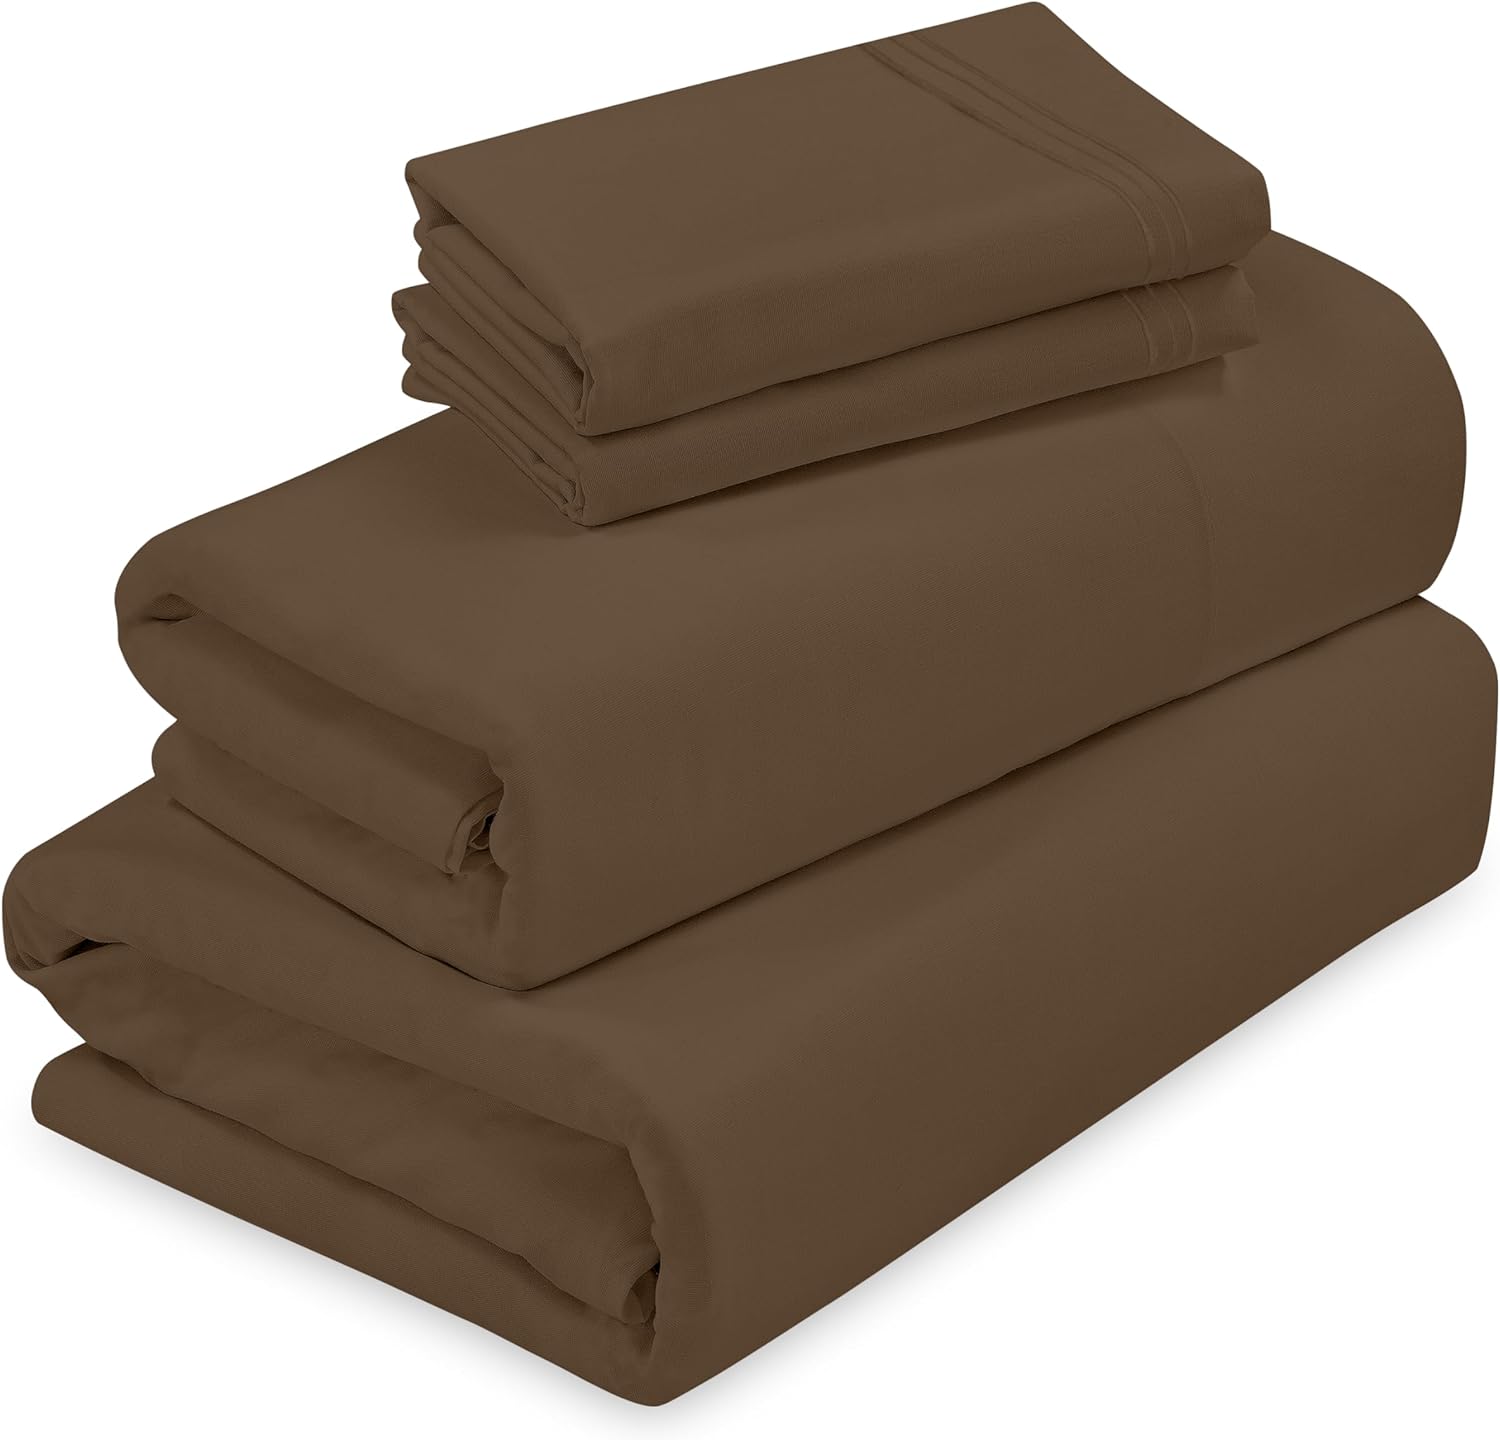 Royale Linens - 4 Piece Queen Bed Sheet - Soft Brushed Microfiber 1800 Bedding Set - 1 Fitted Sheet, 1 Flat Sheet, 2 Pillow Case - Wrinkle Fade &Resistant Luxury Queen Size Sheet Set (Queen,Chocolate)